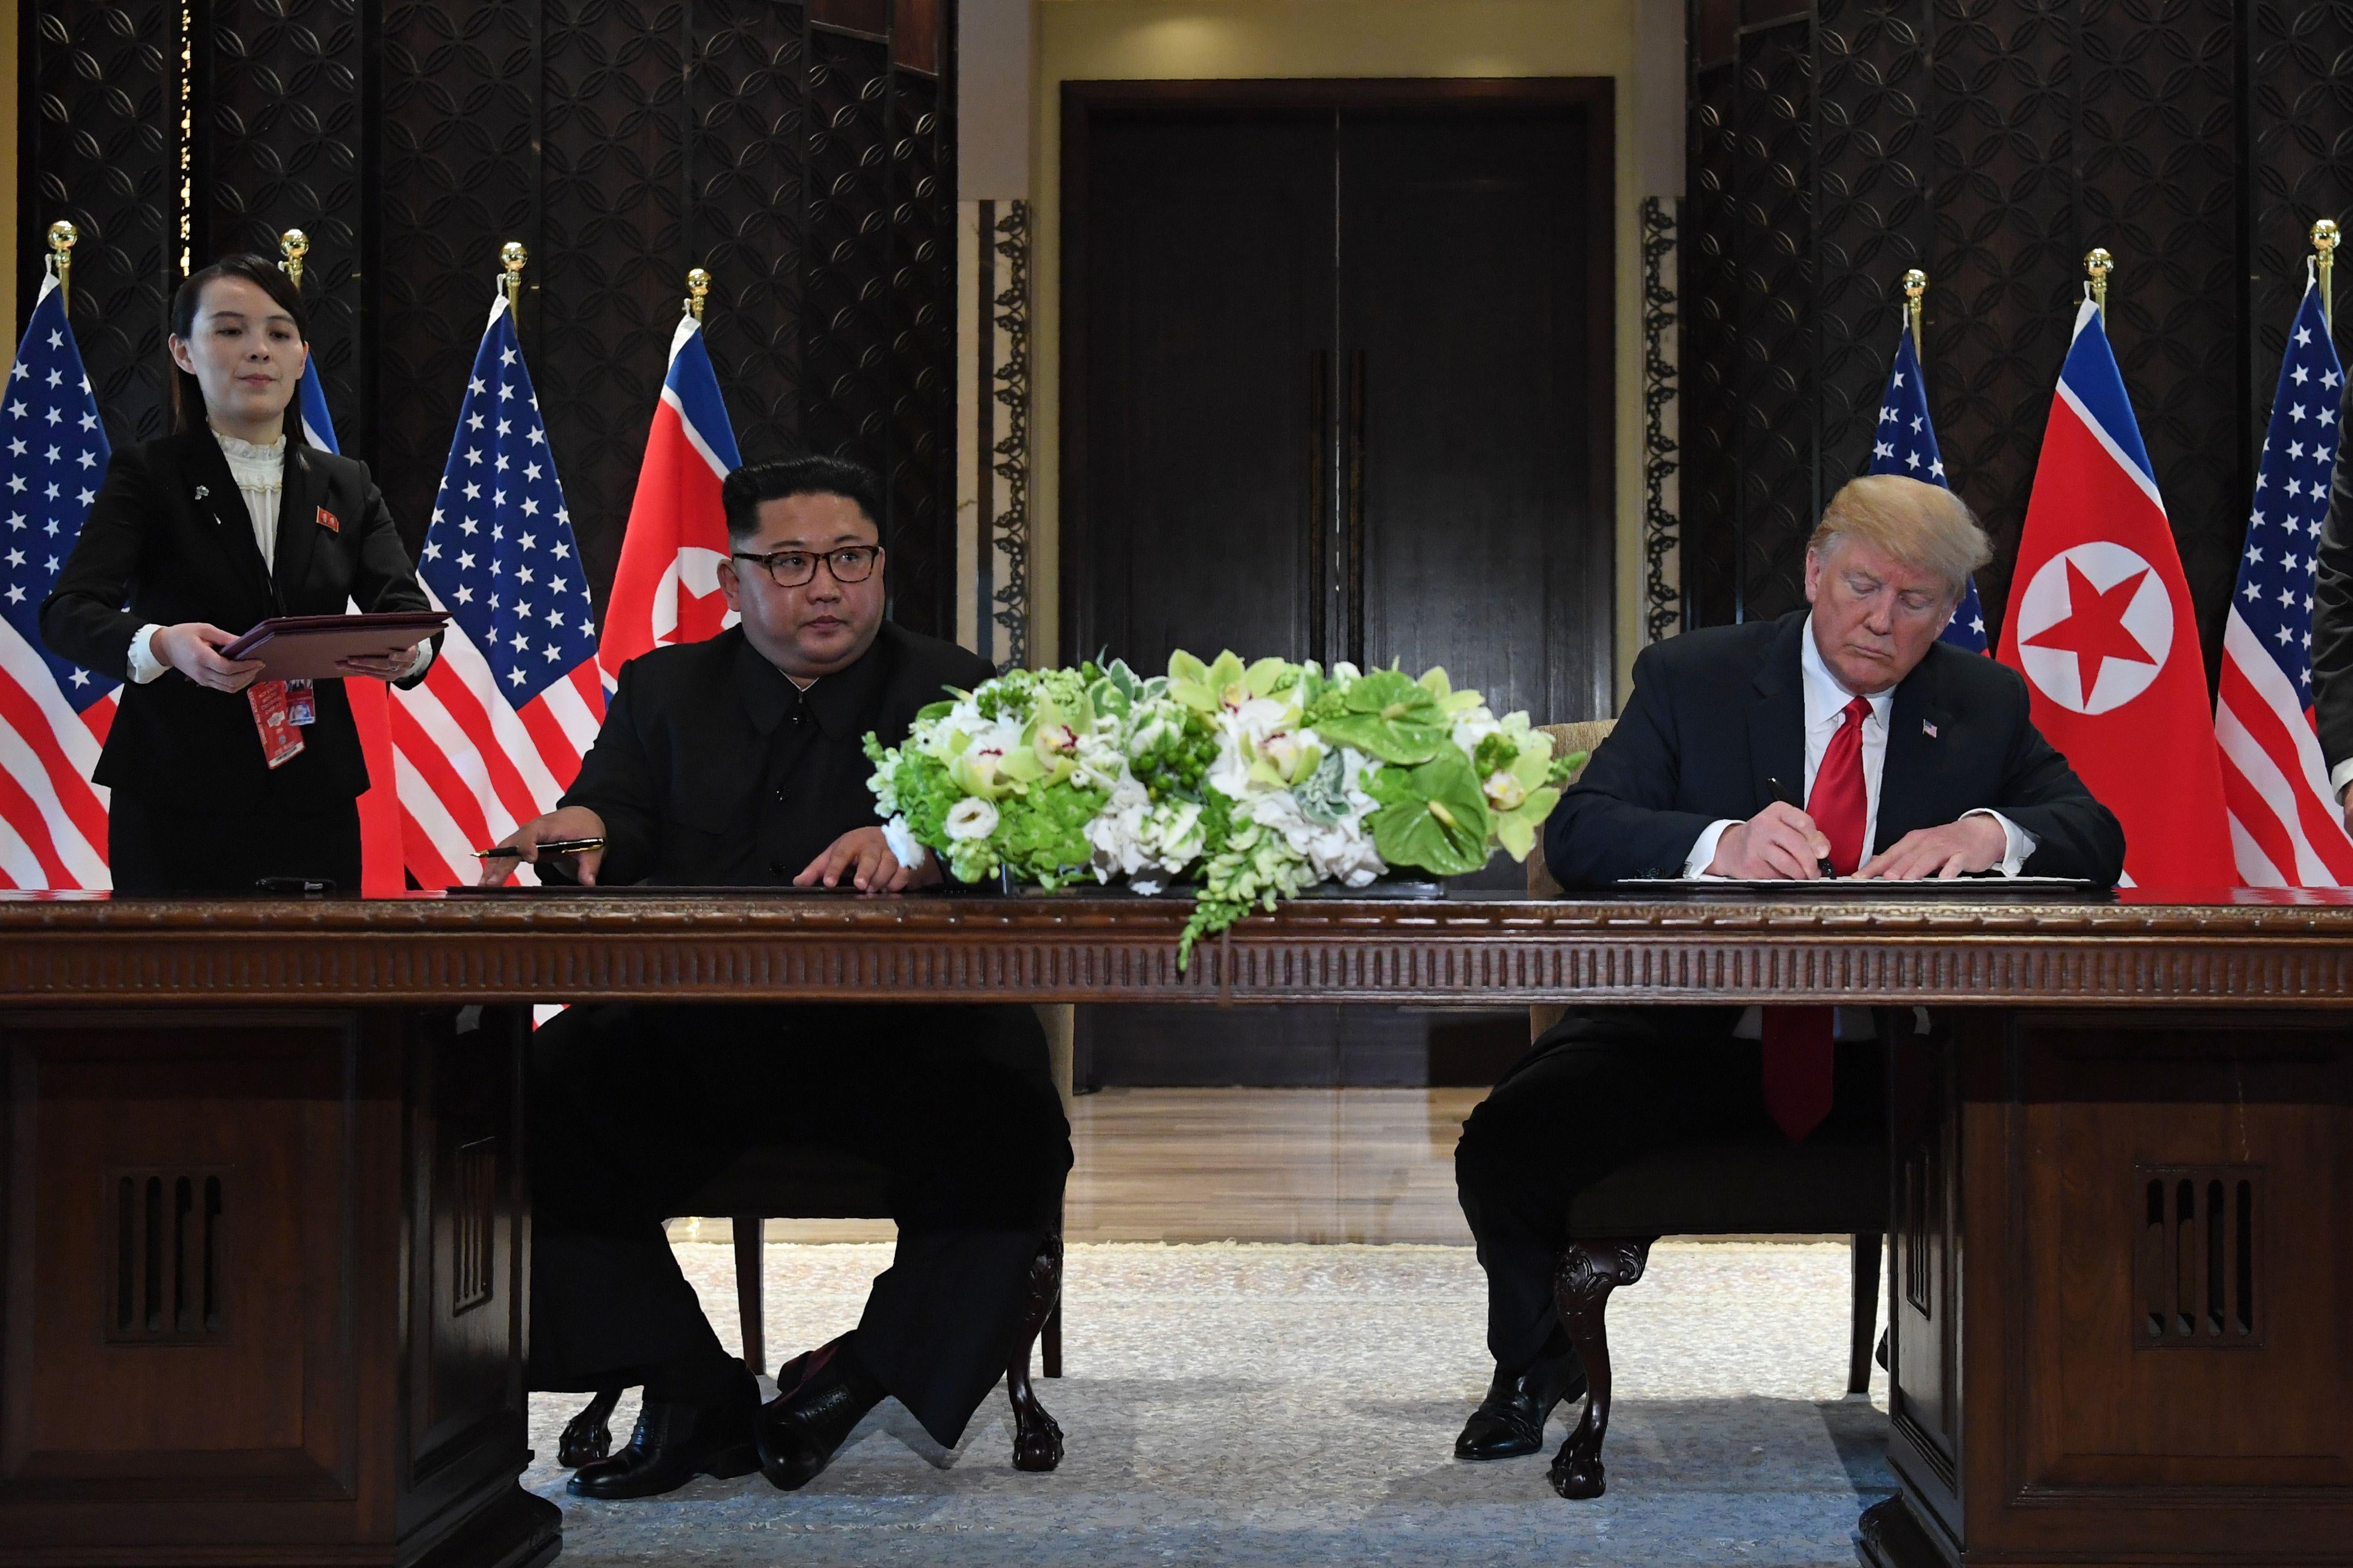 Kim Jong-un and Donald Trump sit at a table and sign the joint statement, with Mike Pompeo standing over Trump.